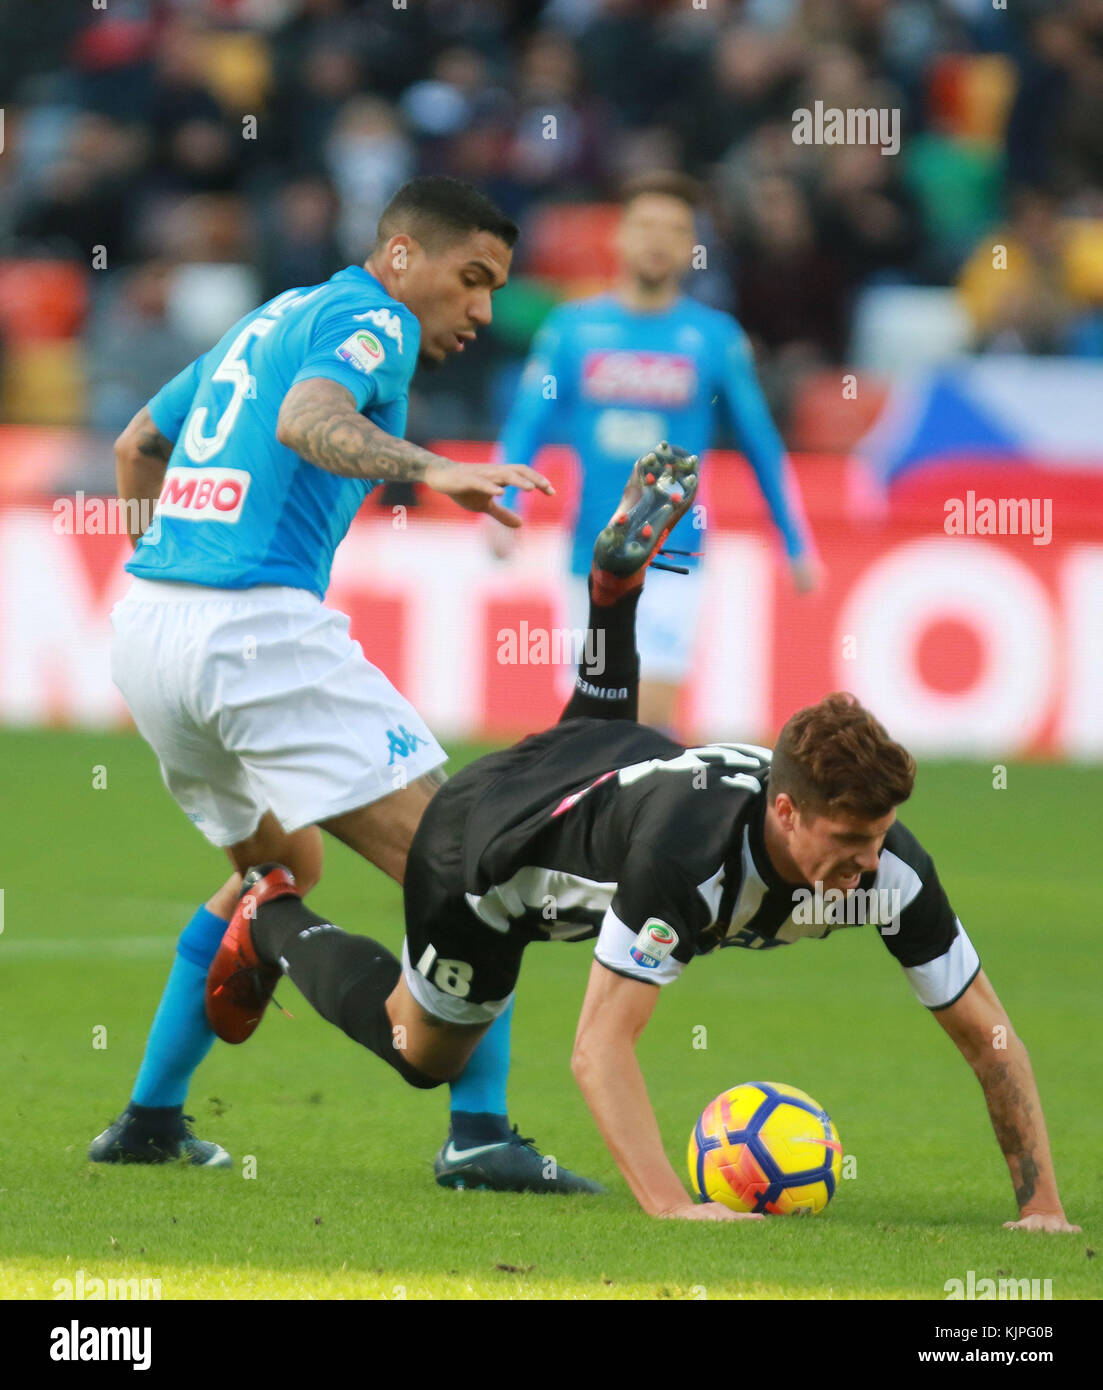 ITALY, Udine: Udinese's forward Stipe Perica (R) fights for the ball with Napoli's midfielder Allan (L) during the Serie A football match between Udinese Calcio v SSC Napoli at Dacia Arena Stadium on 26th November, 2017. Credit: Andrea Spinelli/Alamy Live News Stock Photo